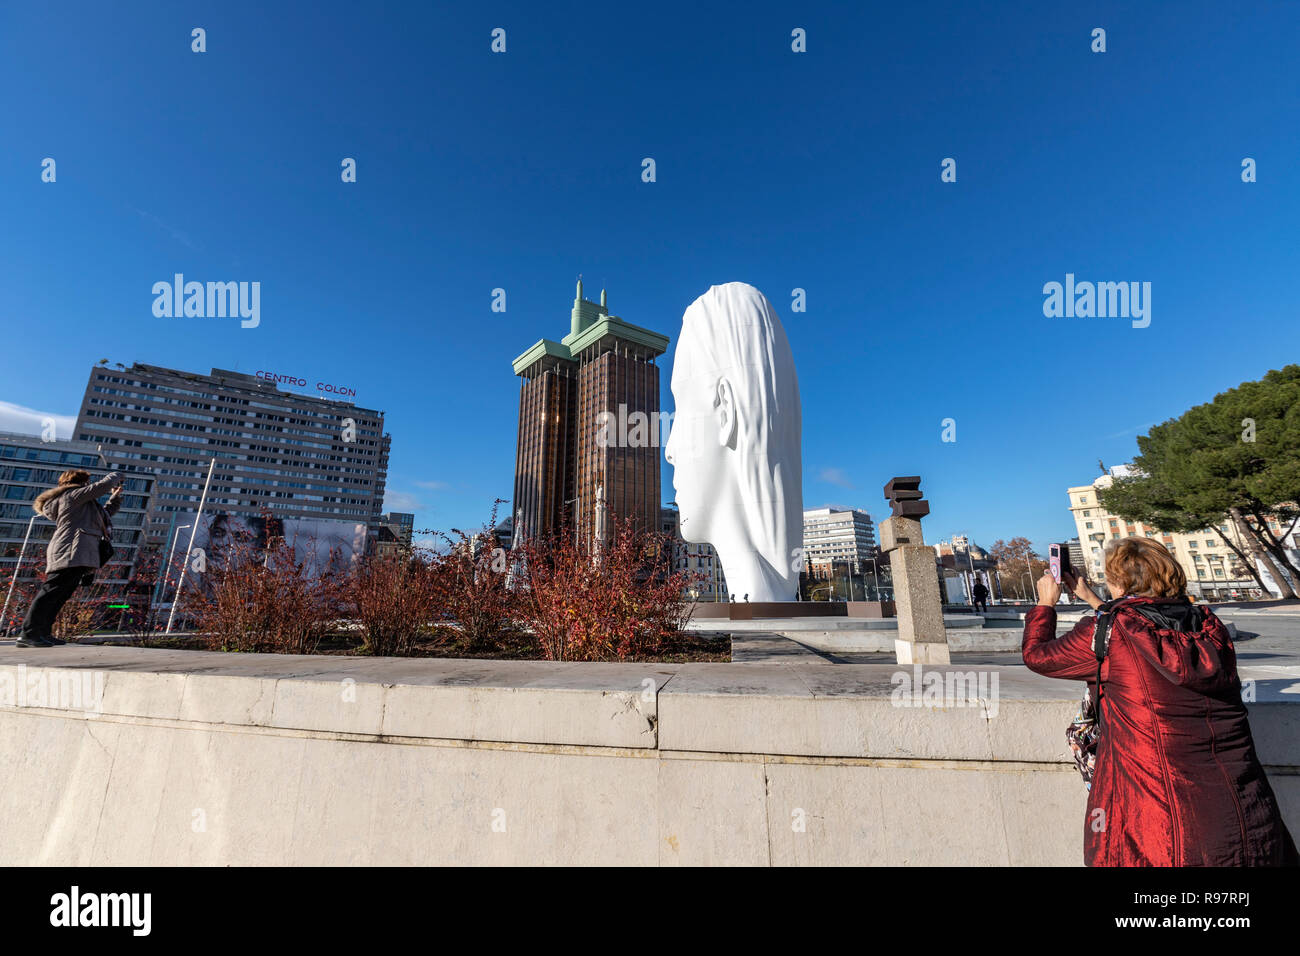 People taking pictures of Julia, white marble sculpture by Jaume Plensa in Plaza Colon, Madrid, Spain Stock Photo